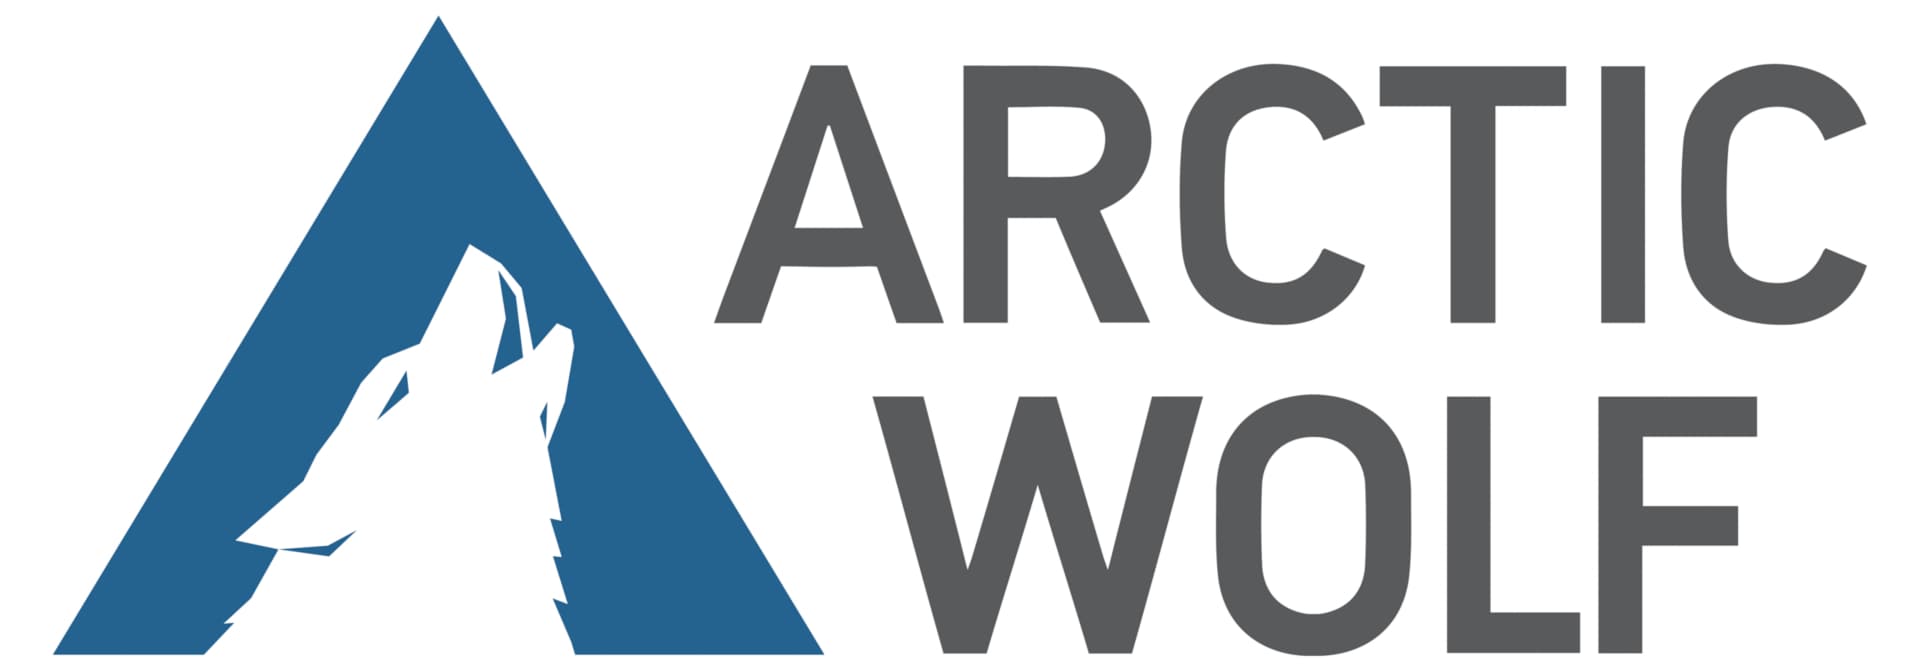 Arctic Wolf Managed Detection and Response - subscription license (10 years